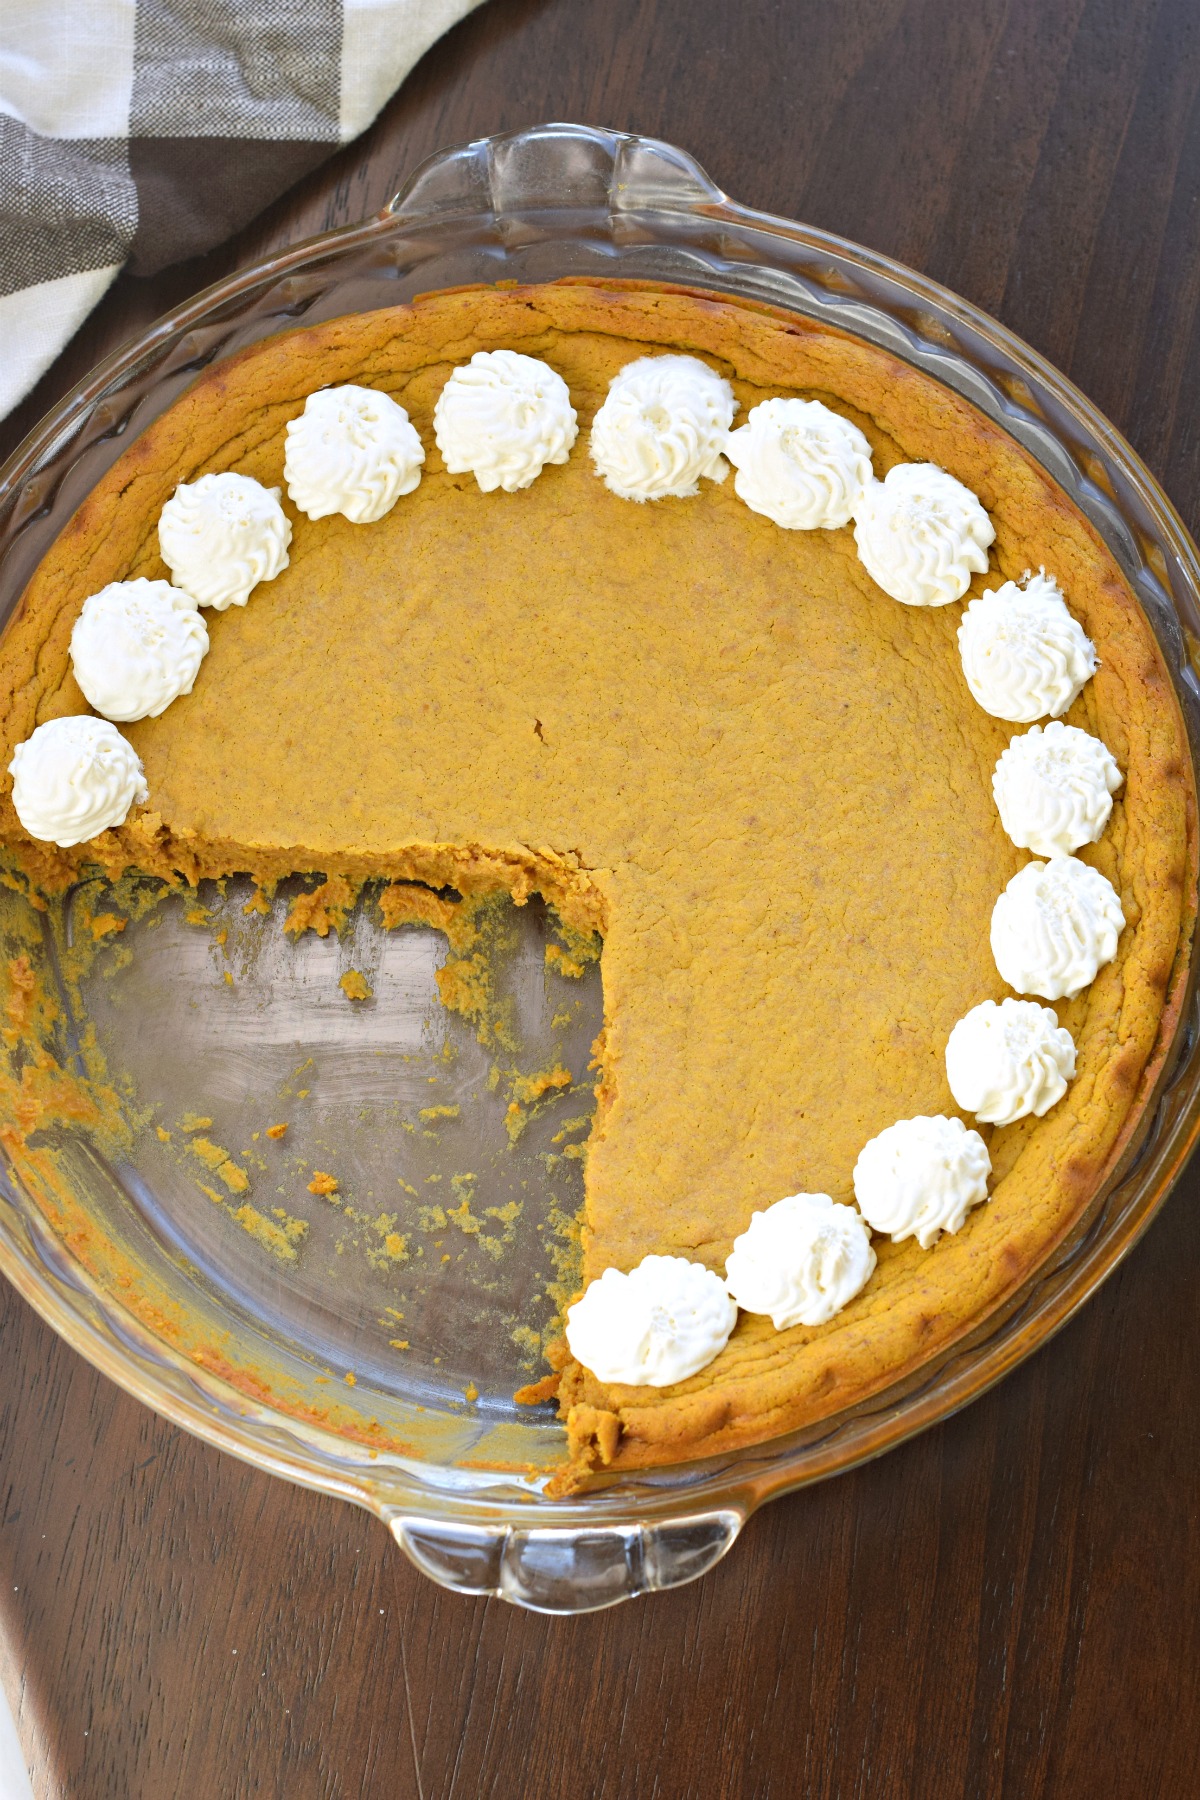 Pumpkin pie with whipped cream in pie plate.